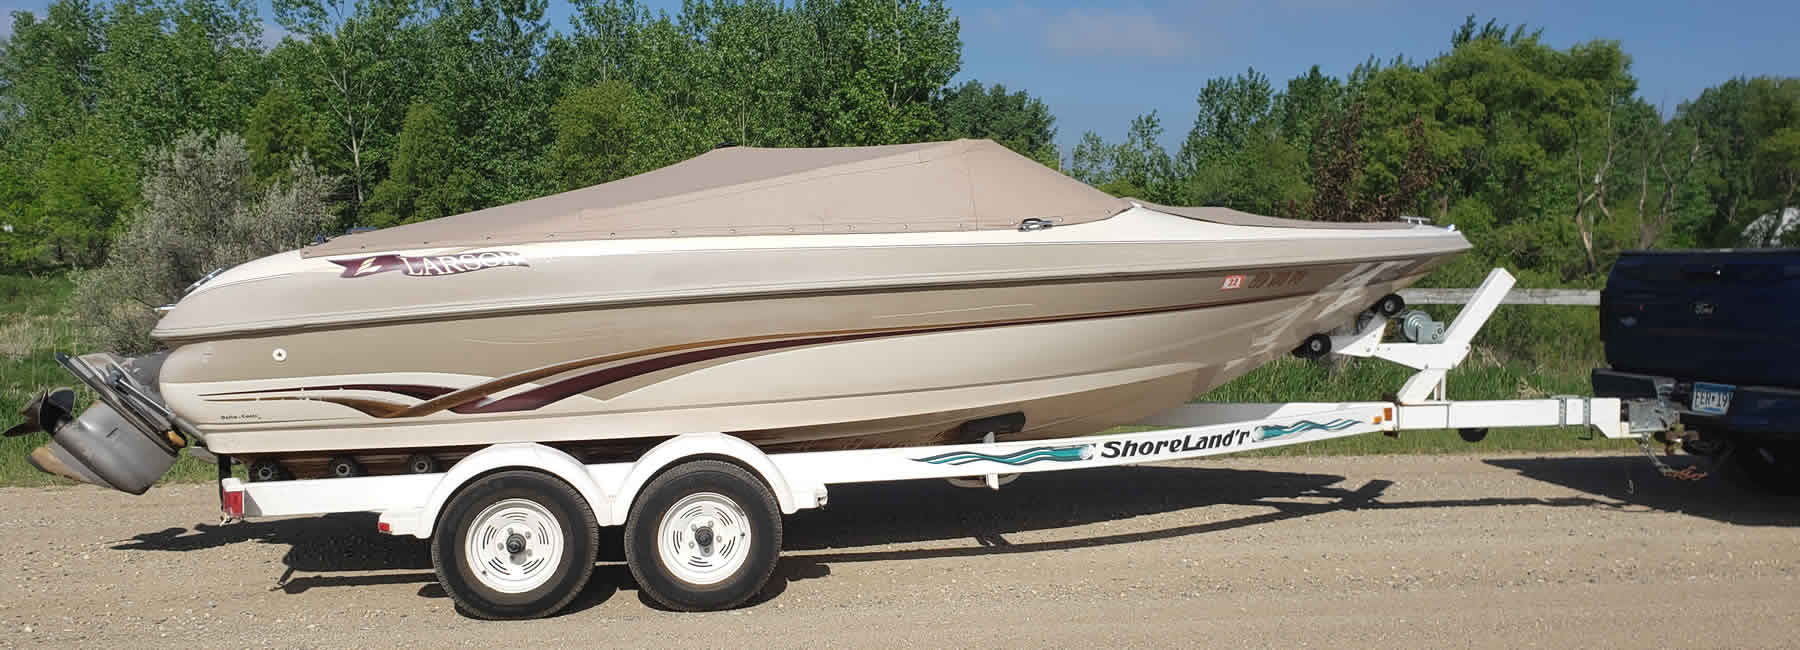 Get a new boat cover from Tarps R Uss of Hawley, Minnesota.